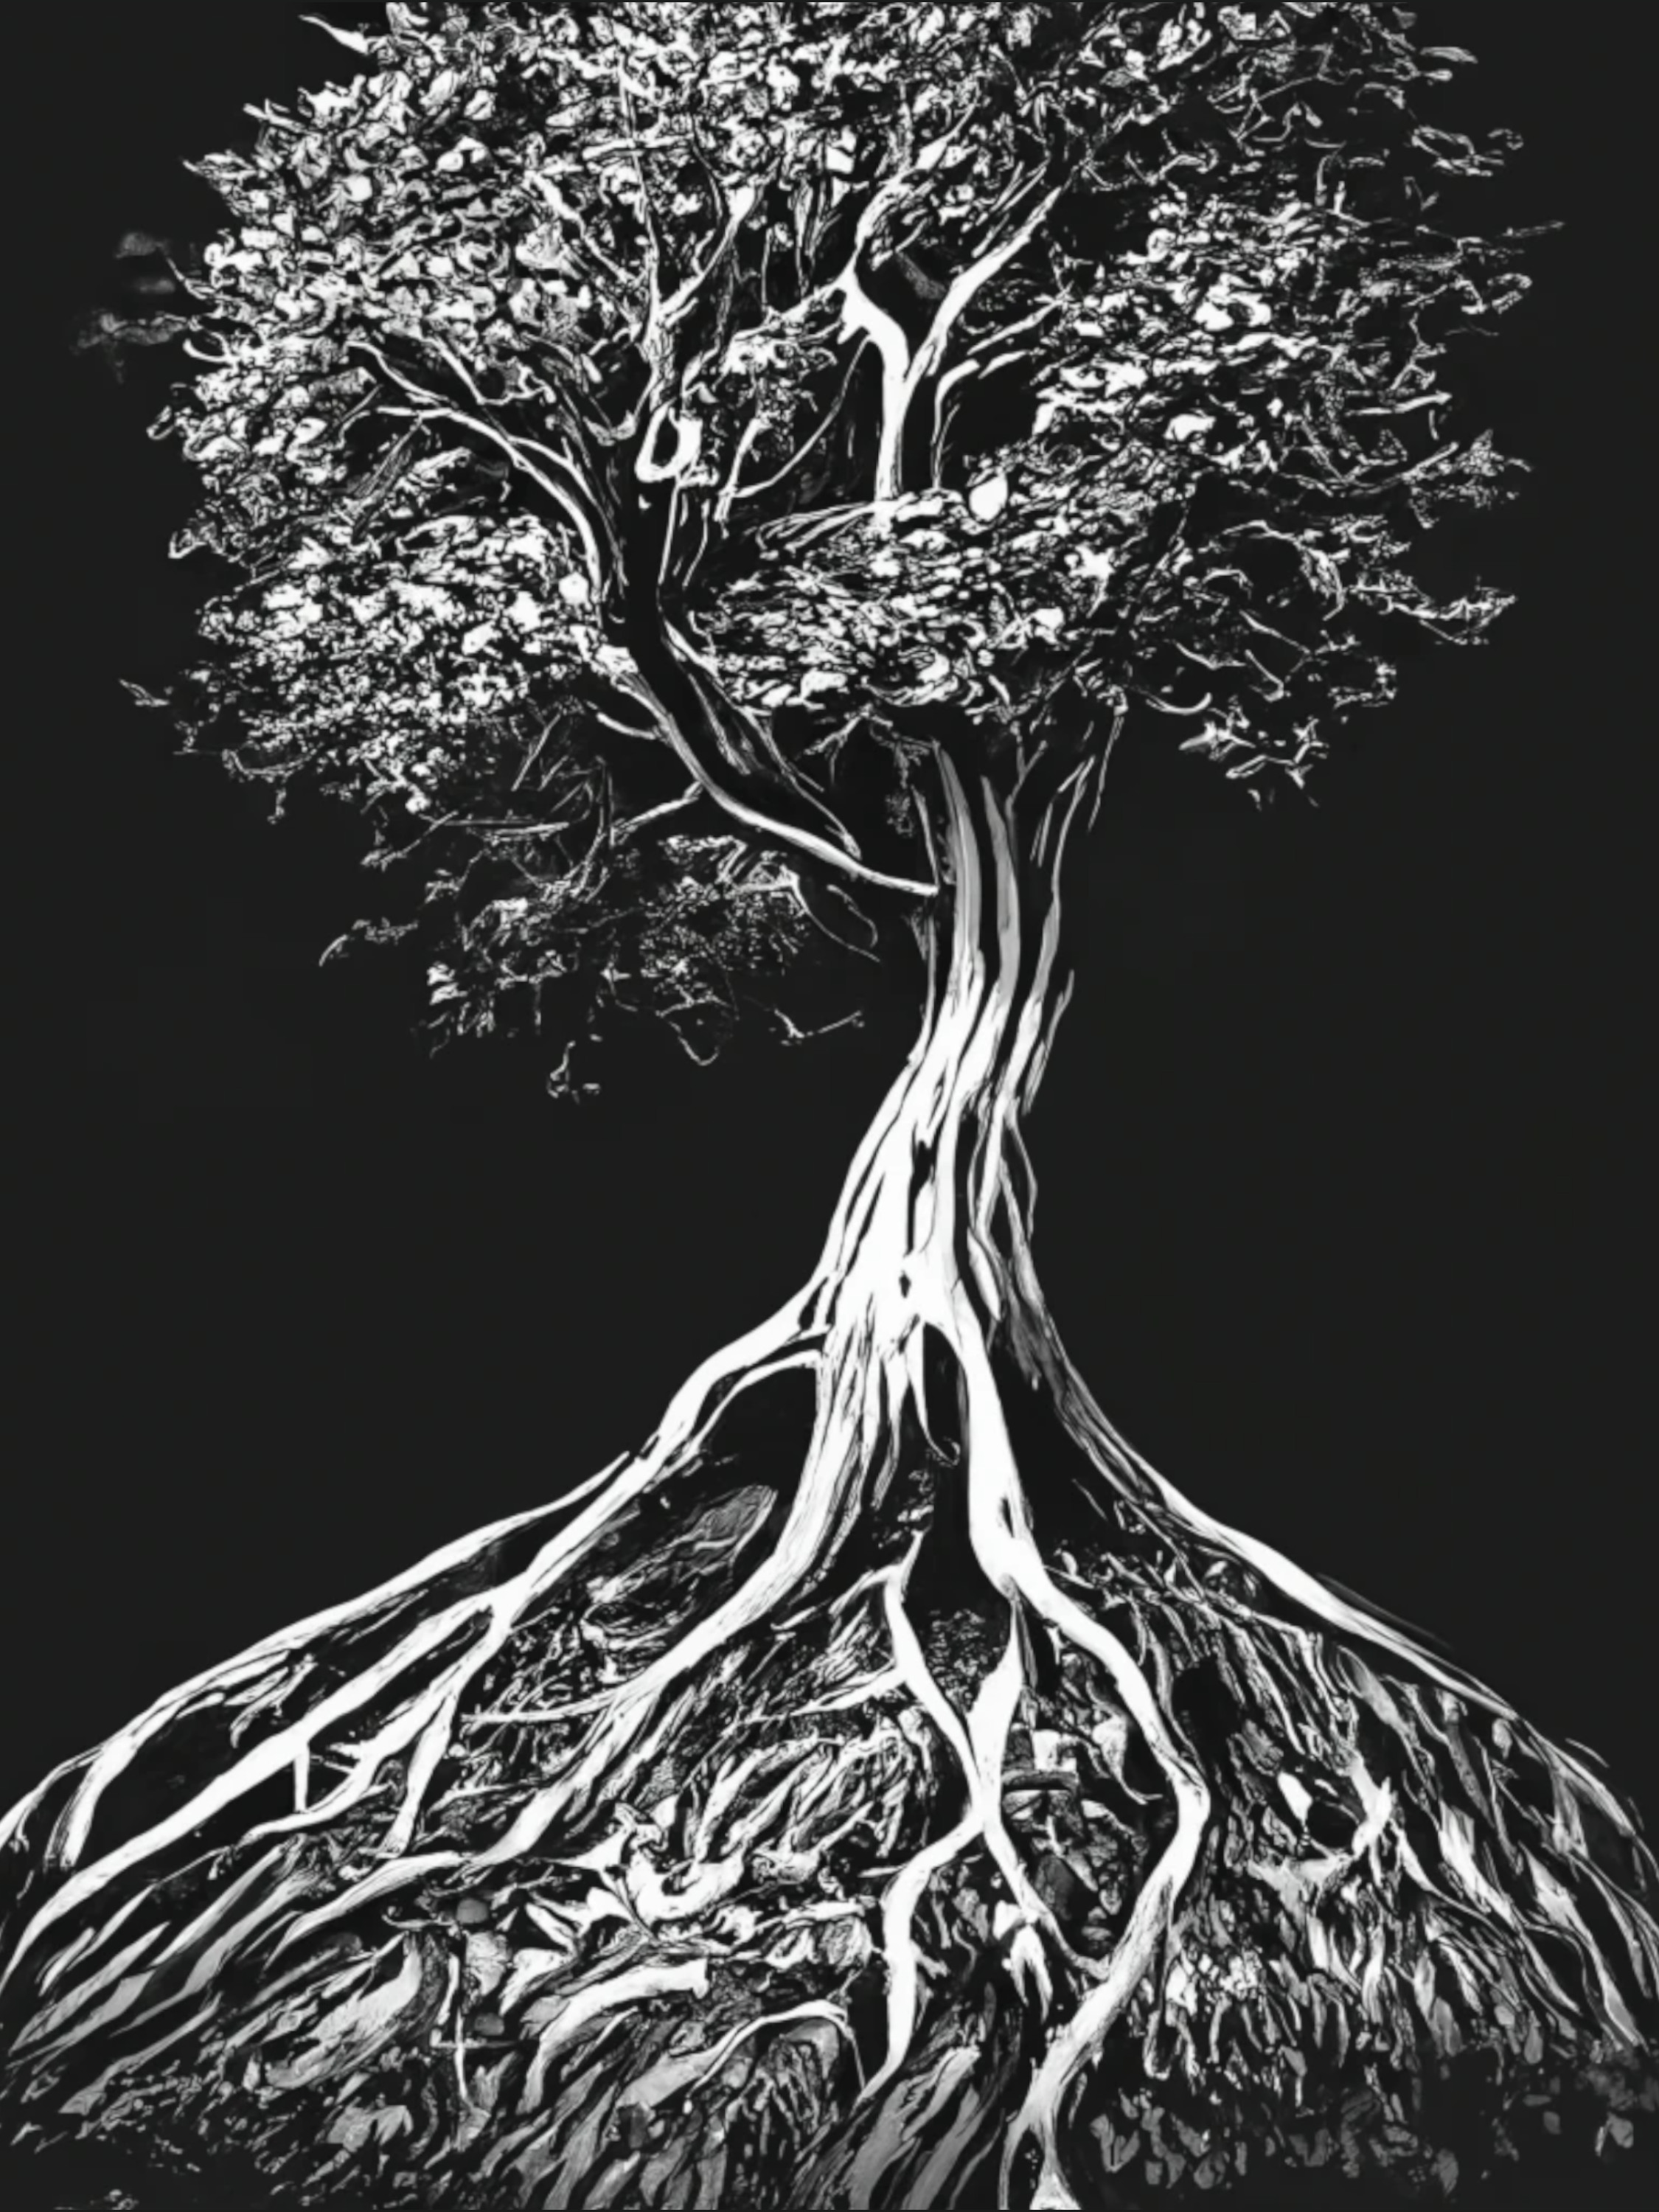 Digital drawing of a well-grounded tree.